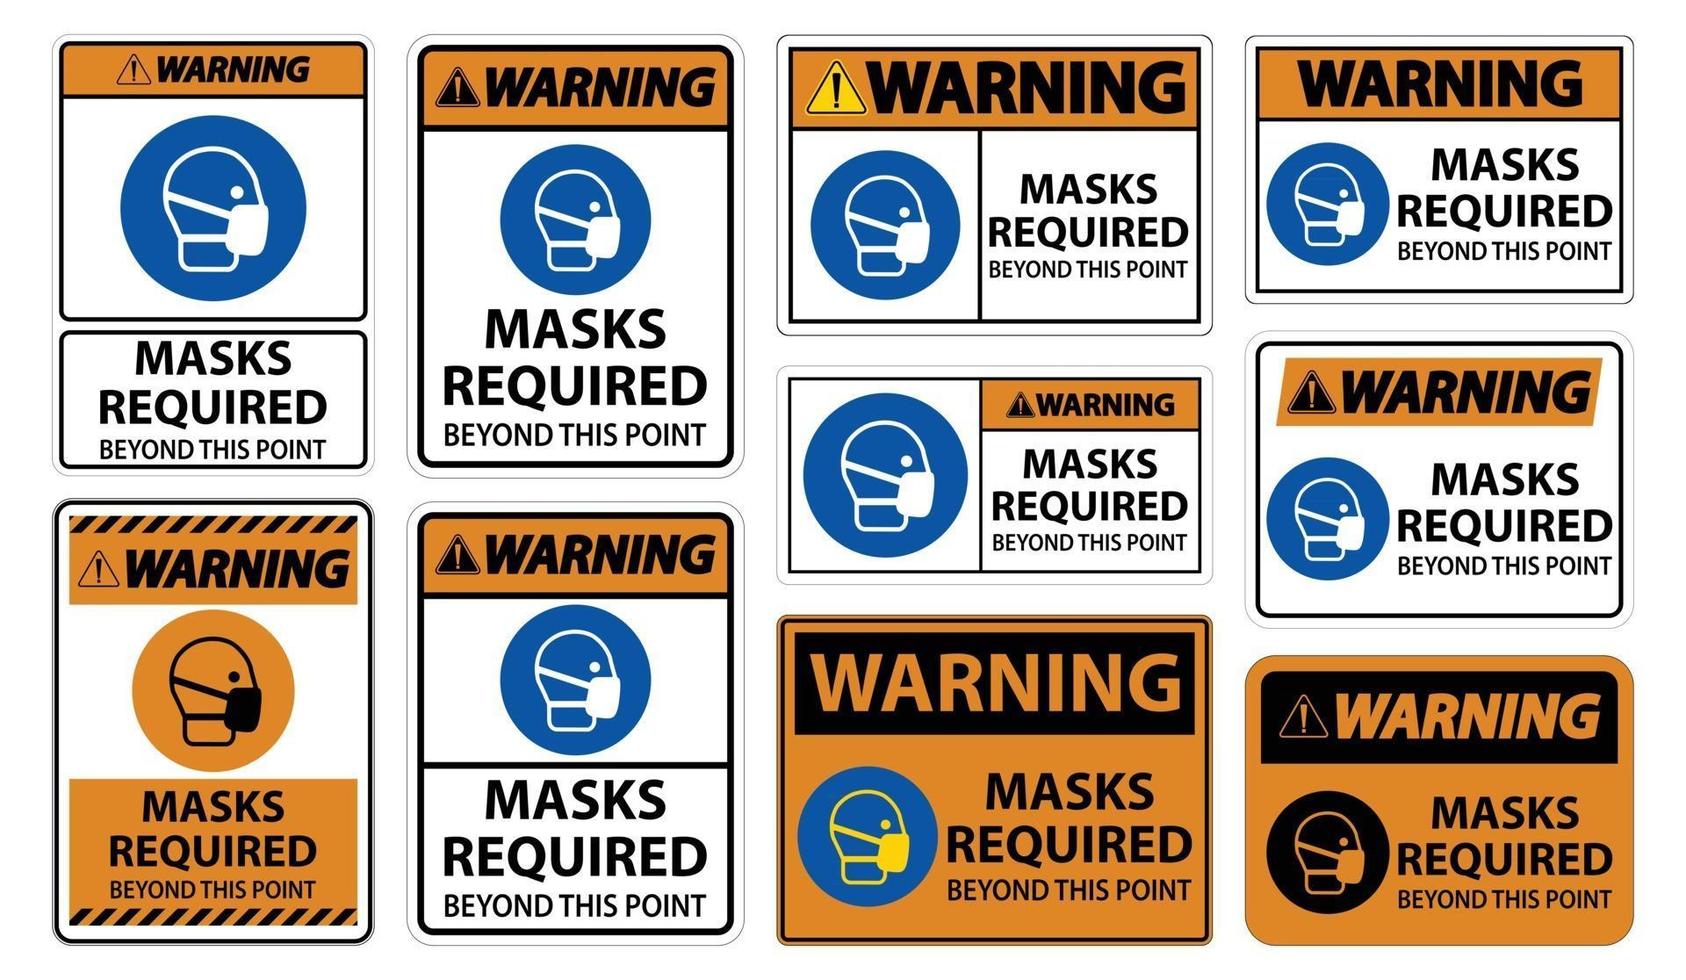 Warning Masks Required Beyond This Point Sign Isolate On White Background,Vector Illustration EPS.10 vector